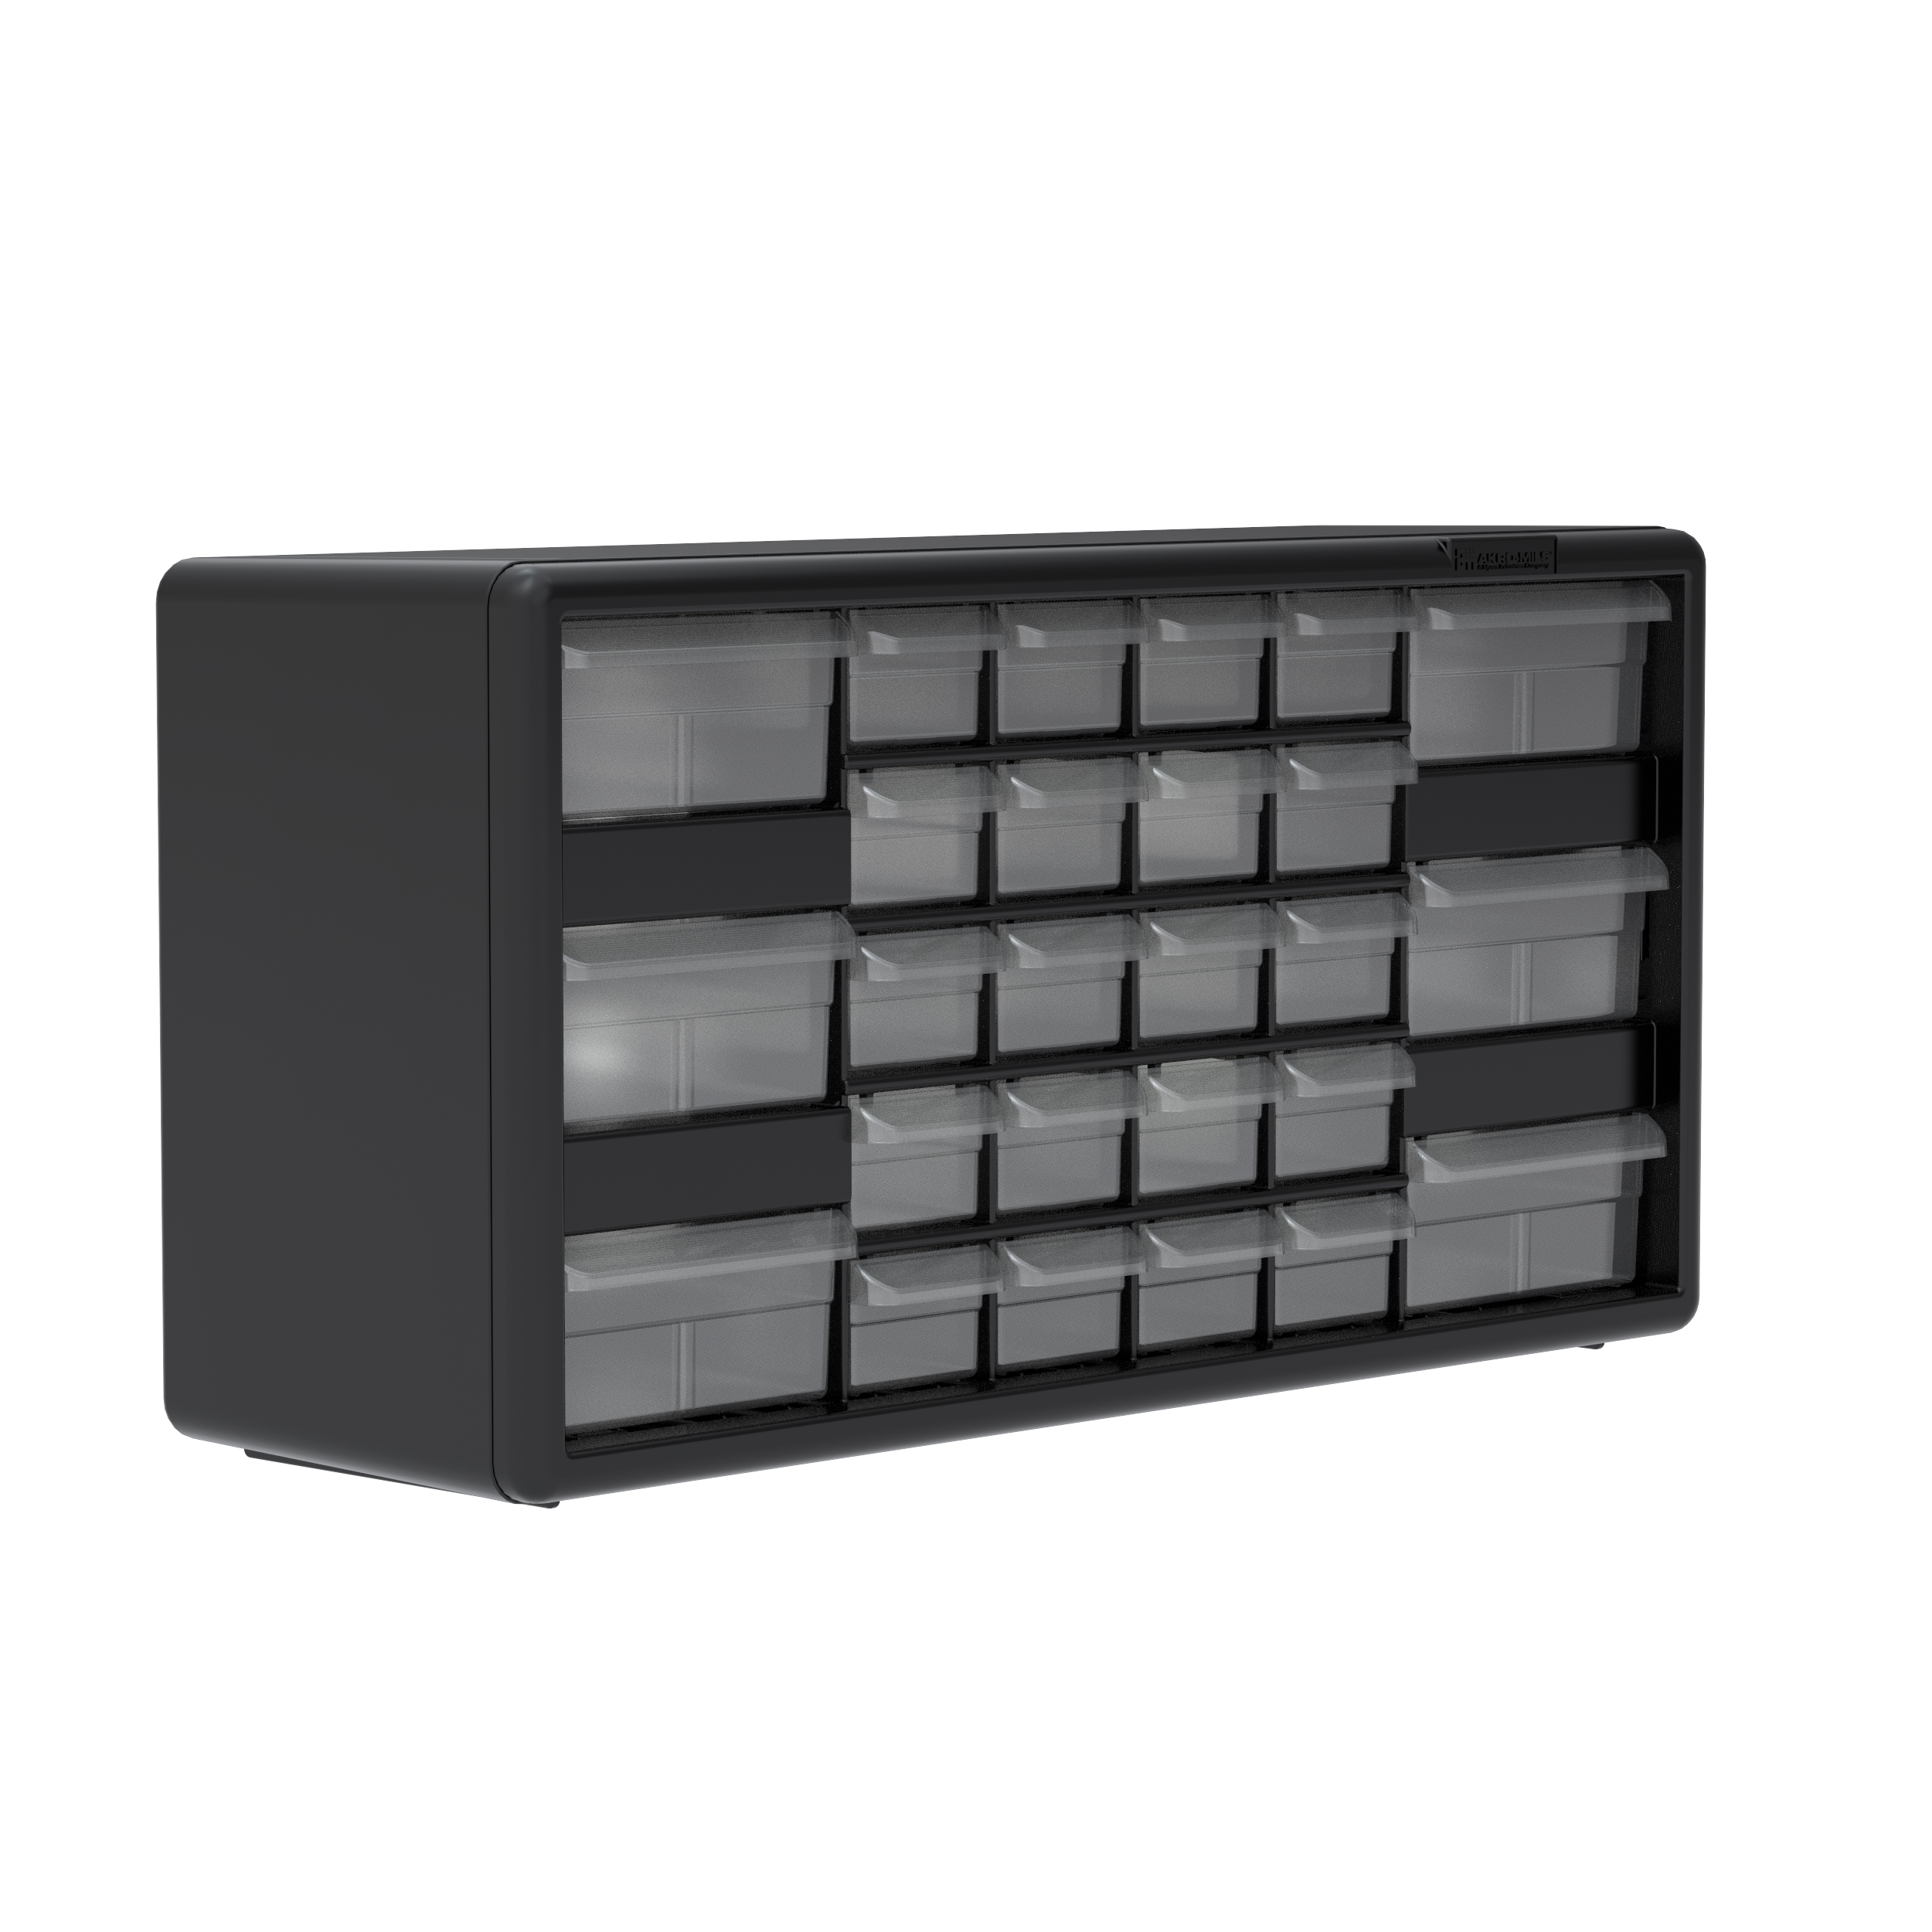 Akro-Mils 26 Drawer Plastic Storage Organizer with Drawers for Hardware,  Small Parts, Craft Supplies, Black 